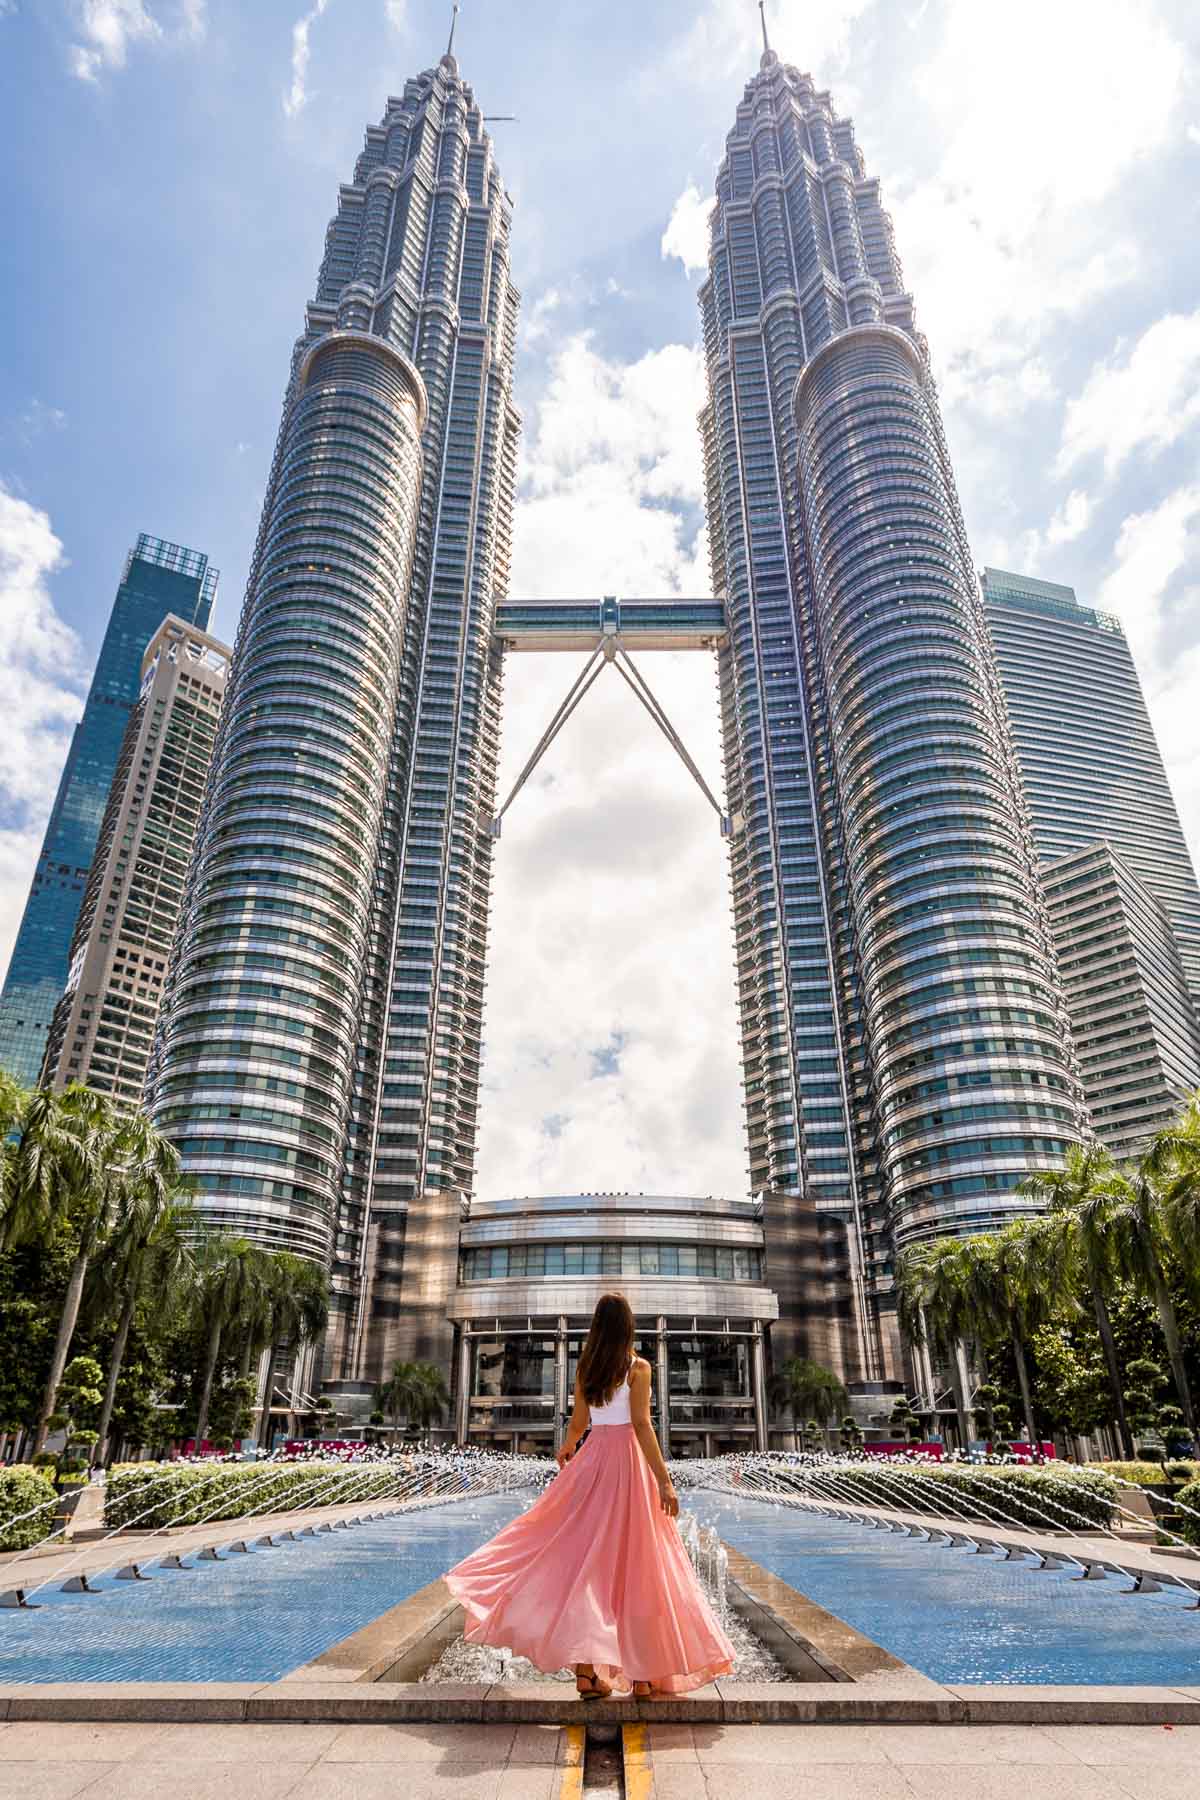 Girl in pink skirt in front of the Petronas Towers, Kuala Lumpur